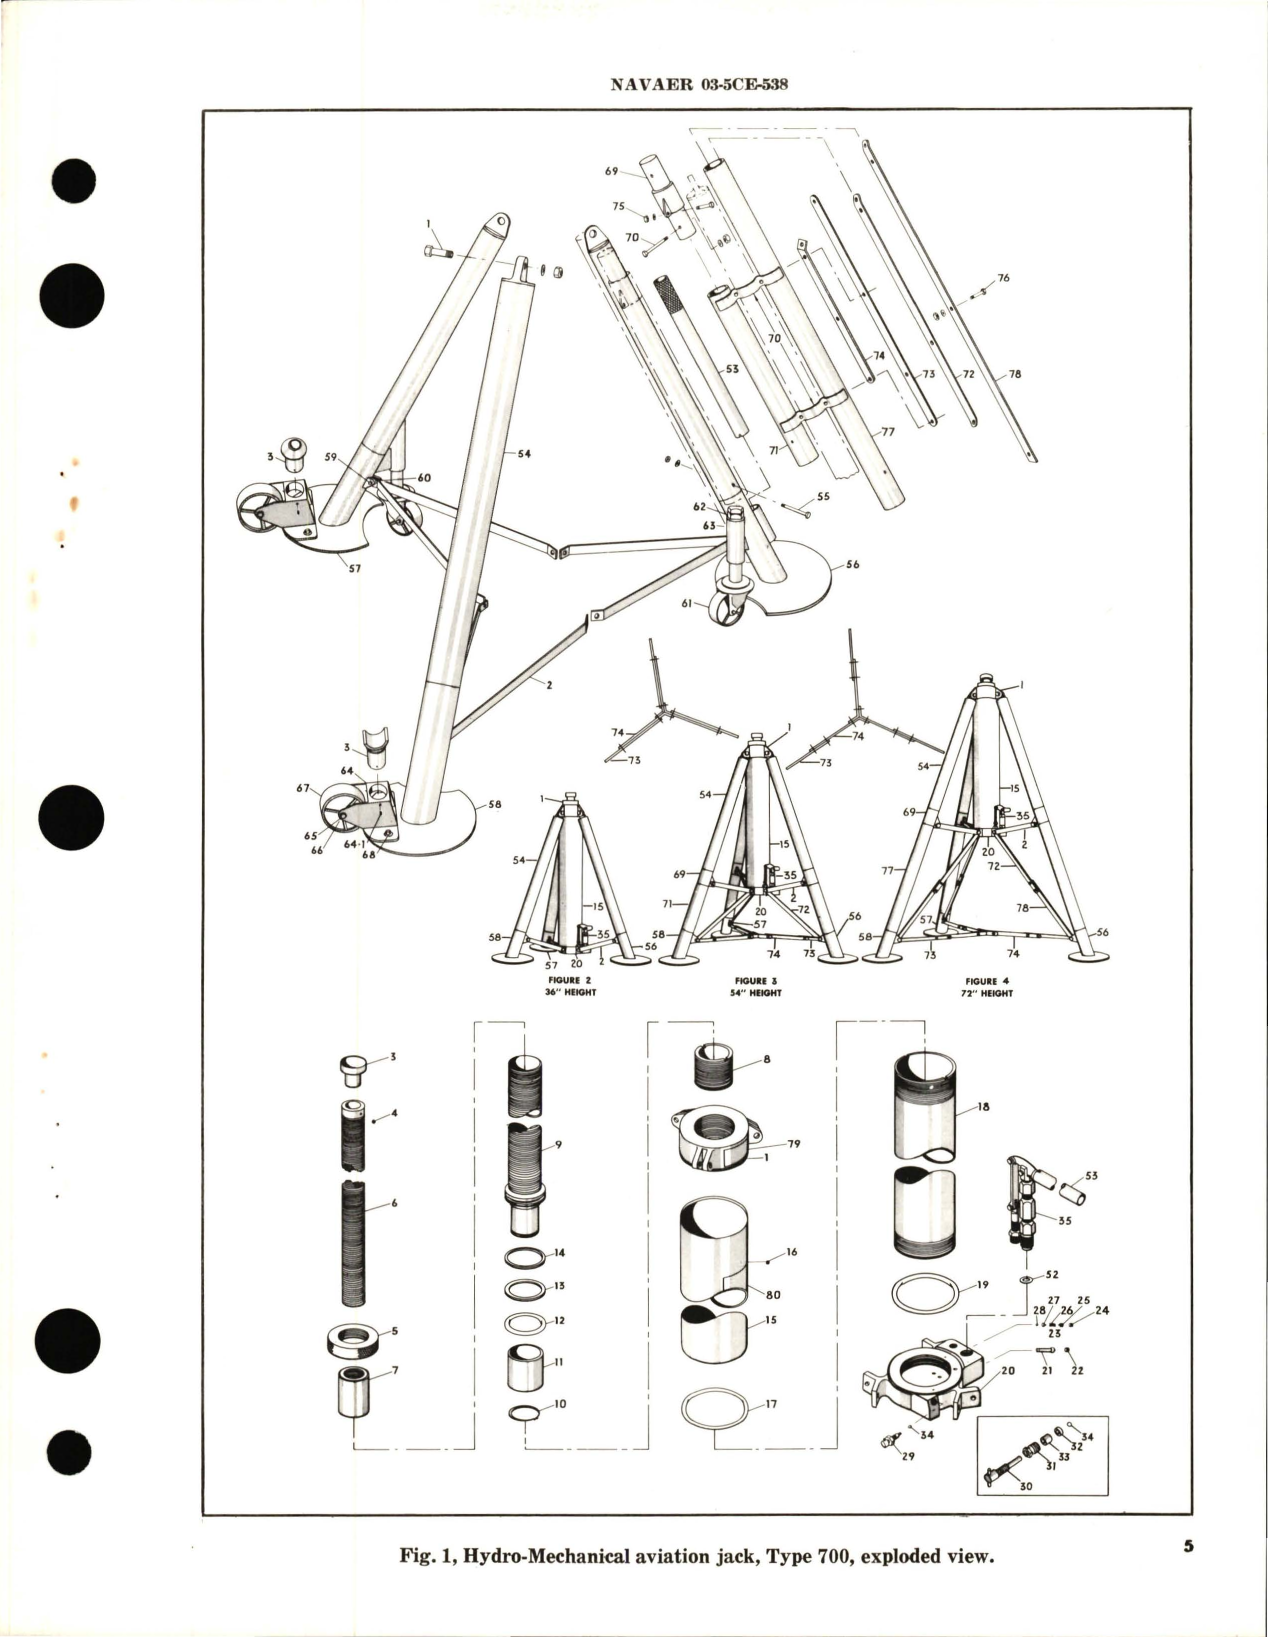 Sample page 5 from AirCorps Library document: Operations, Service and Overhaul Instructions with Parts Breakdown for Hydro Mechanical Aviation Jack, Single Stage Type 700